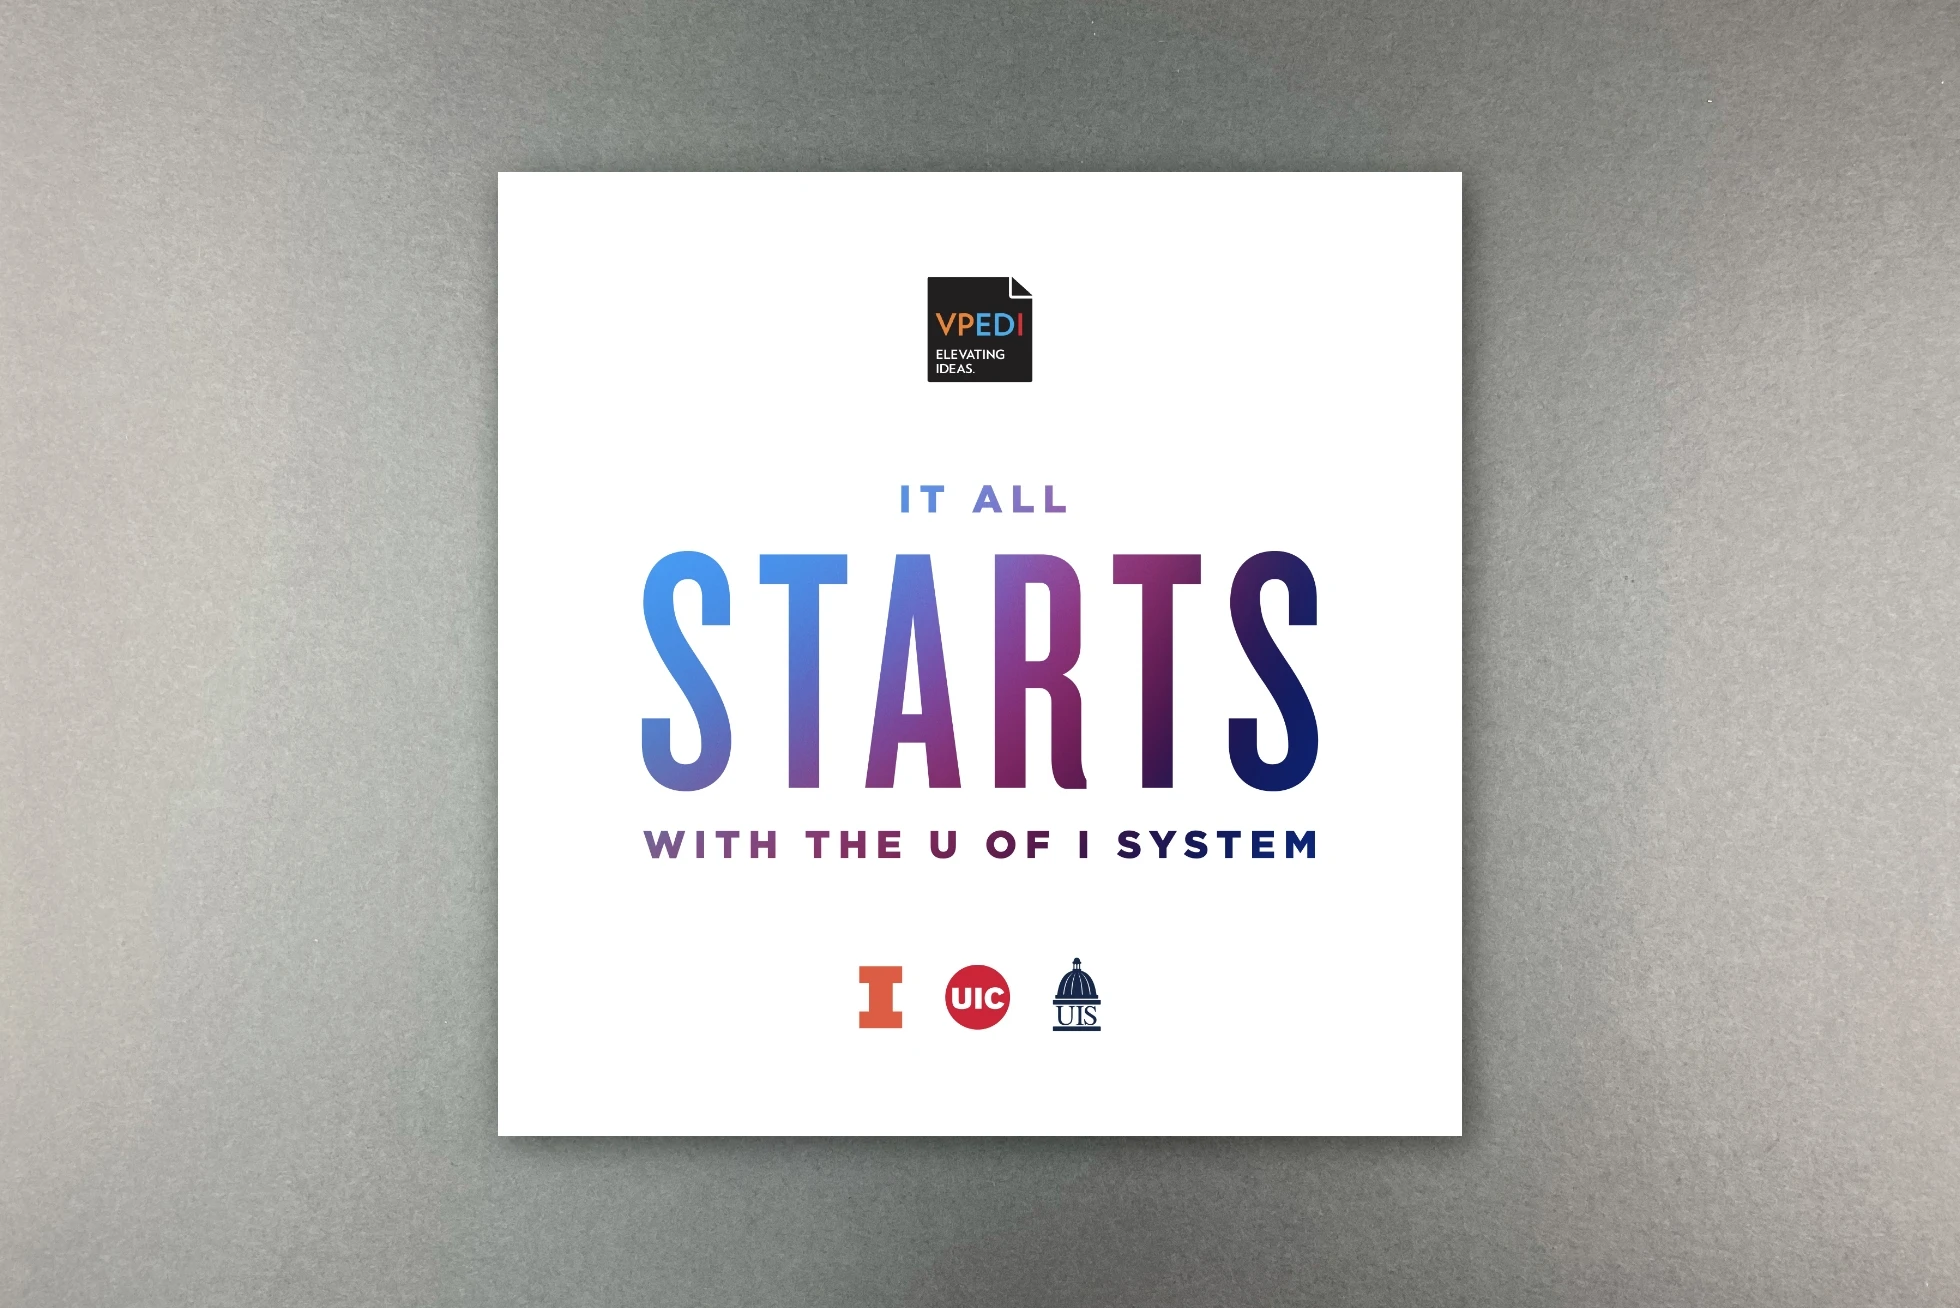 A poster that says it all starts with the up system.